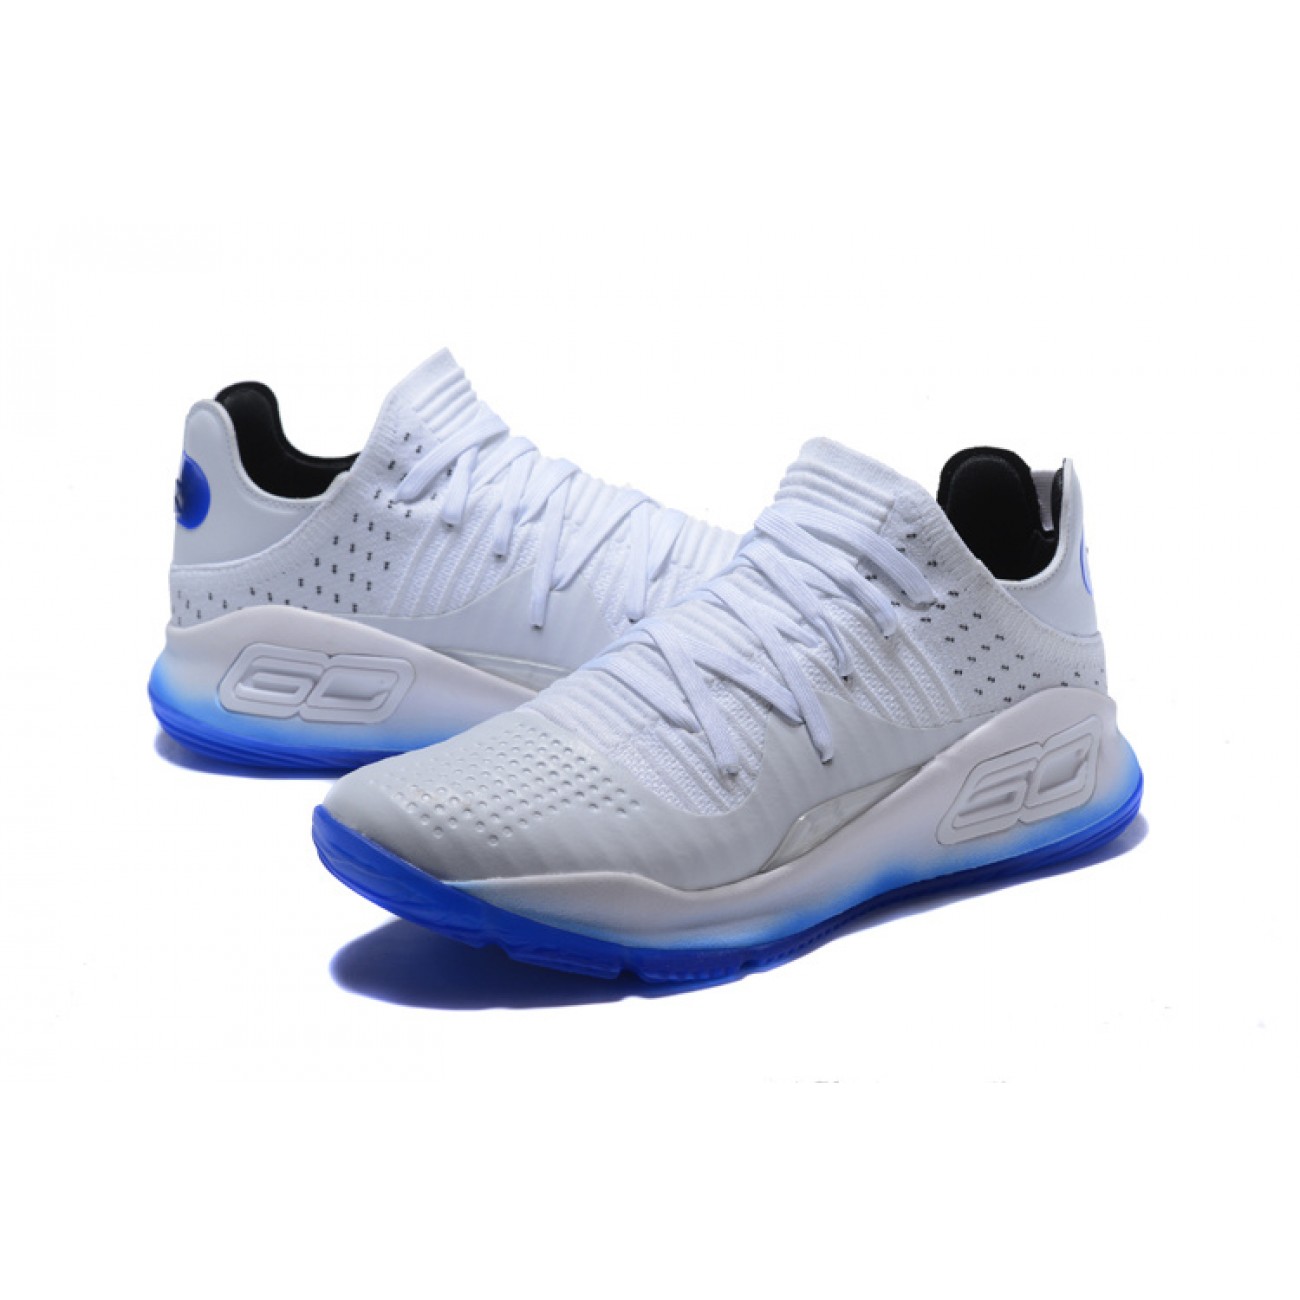 Under Armour UA Curry 4 Low White/Blue